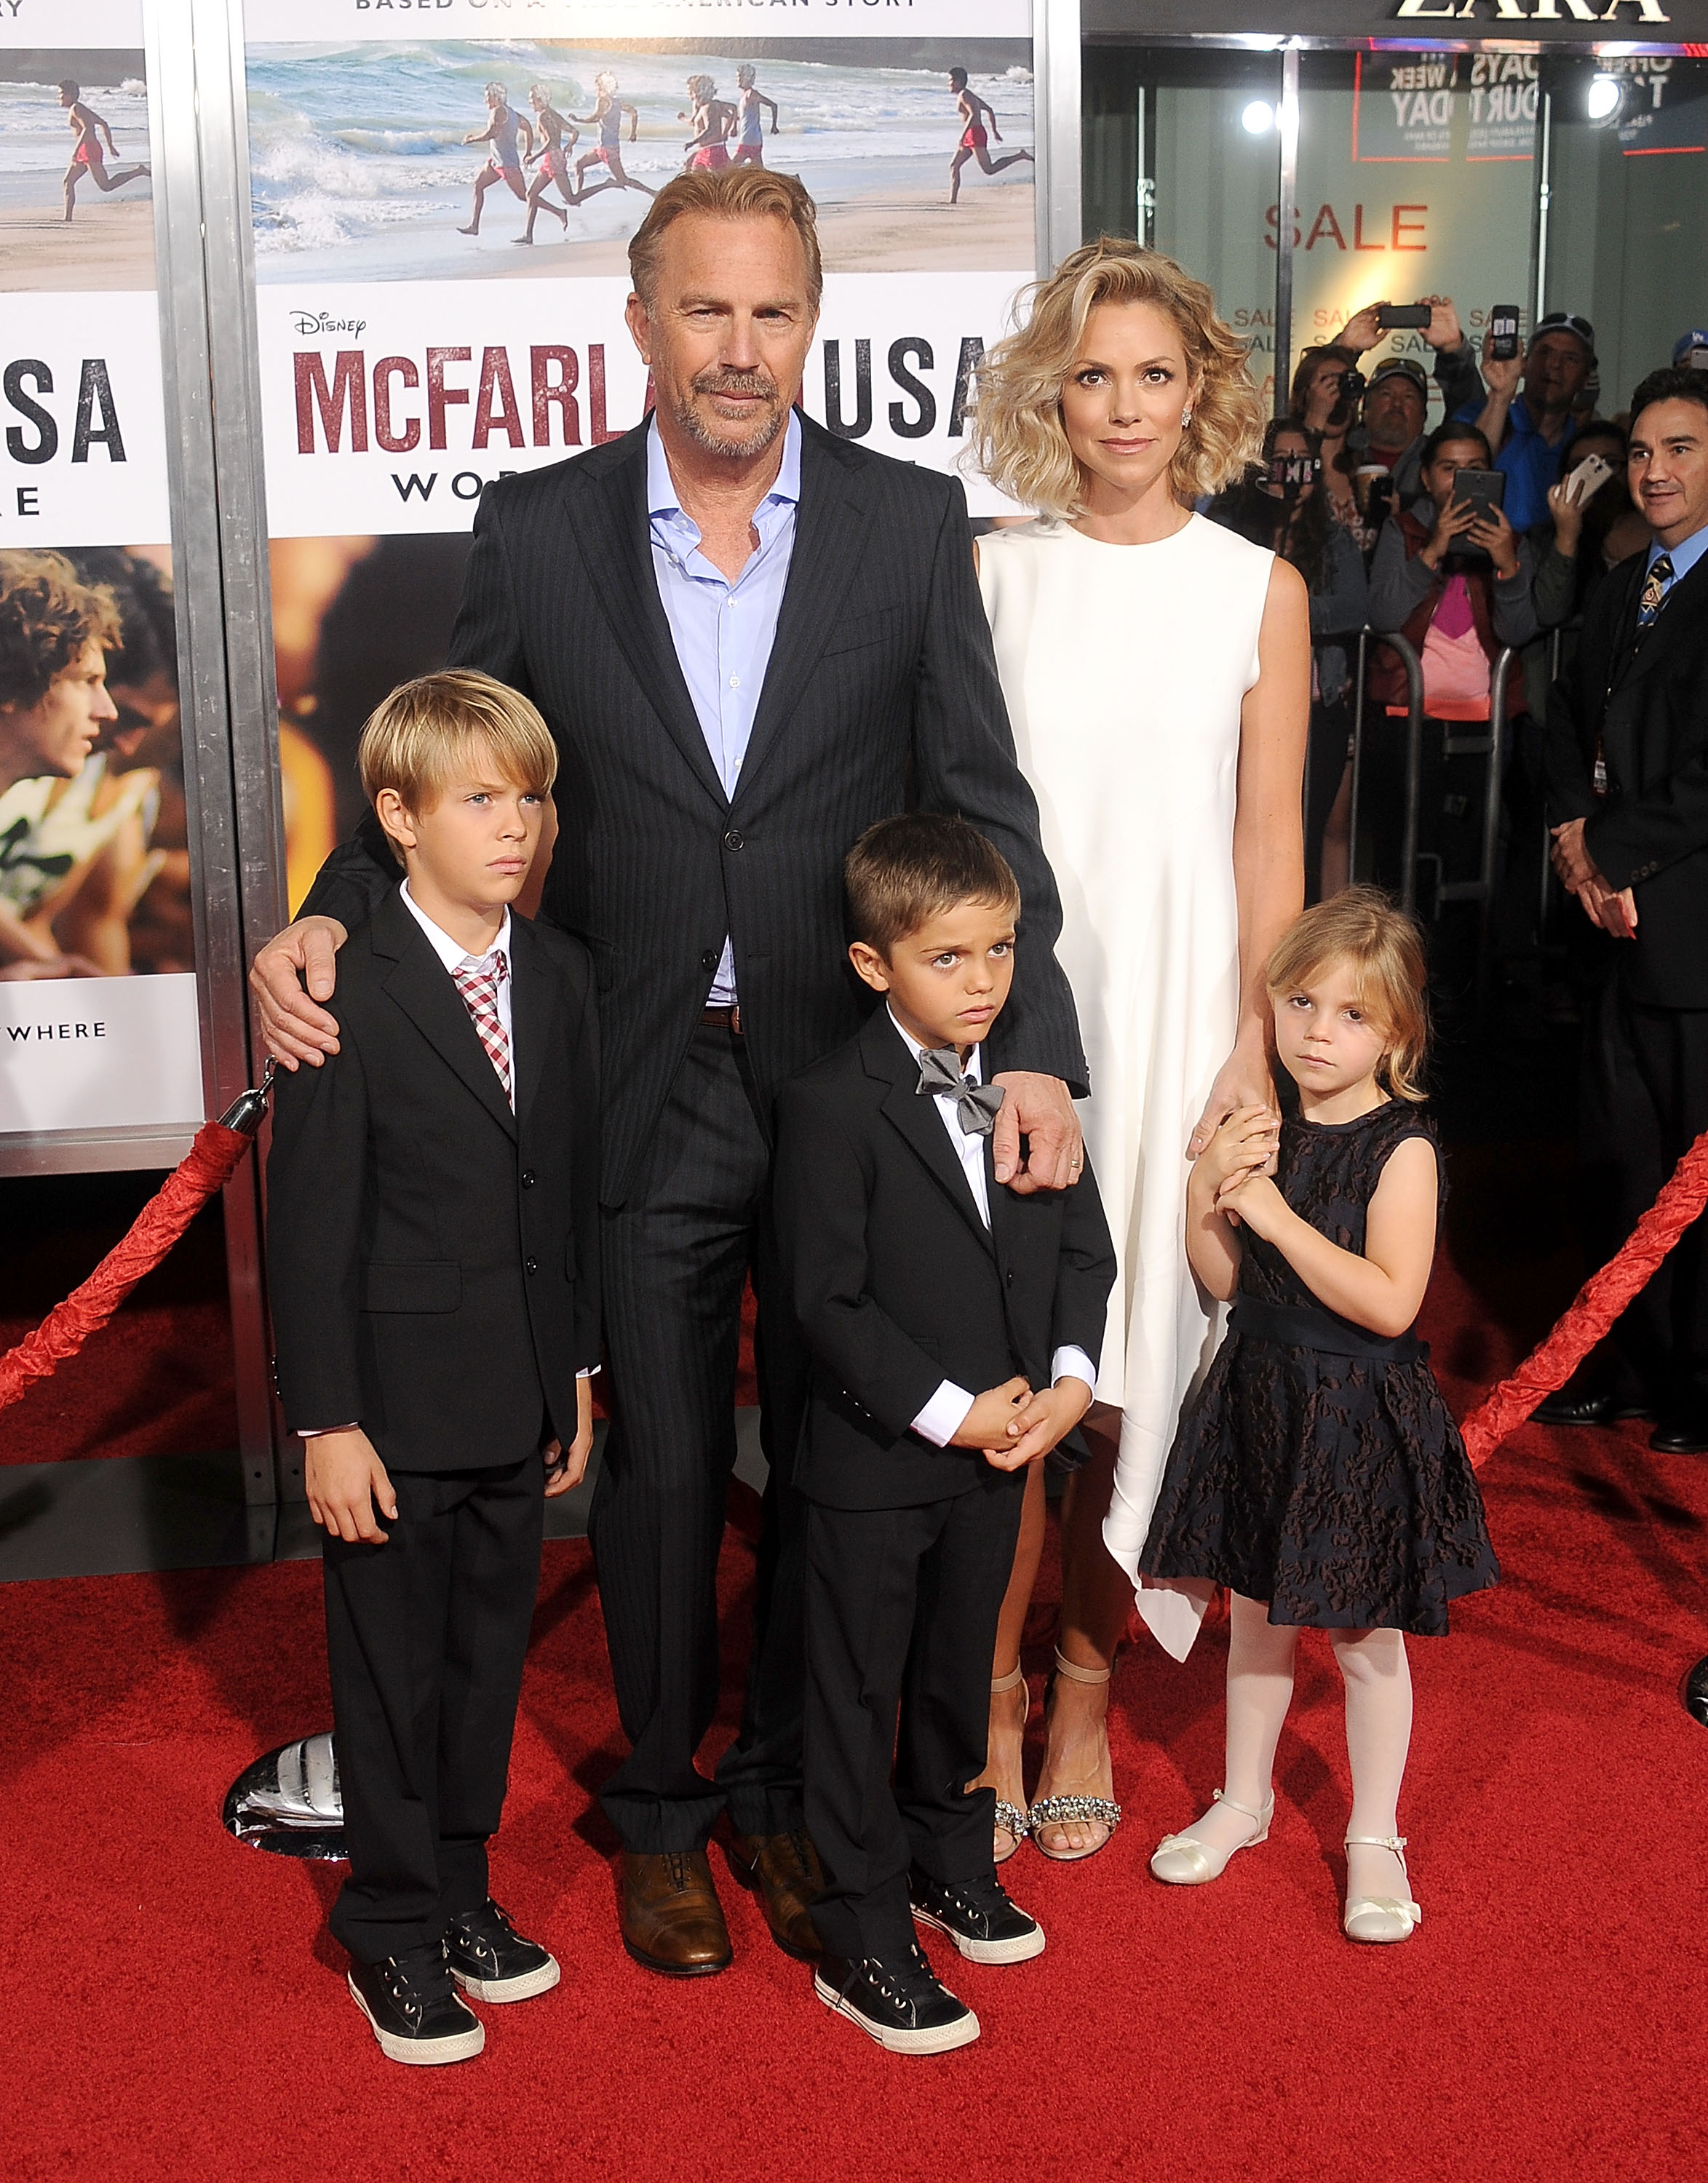 Kevin Costner, his wife Christine Baumgartner, and their children Grace Avery, Hayes Logan, and Cayden Wyatt Costner at the world premiere of "McFarland, USA" on February 9, 2015, in Hollywood, California | Source: Getty Images